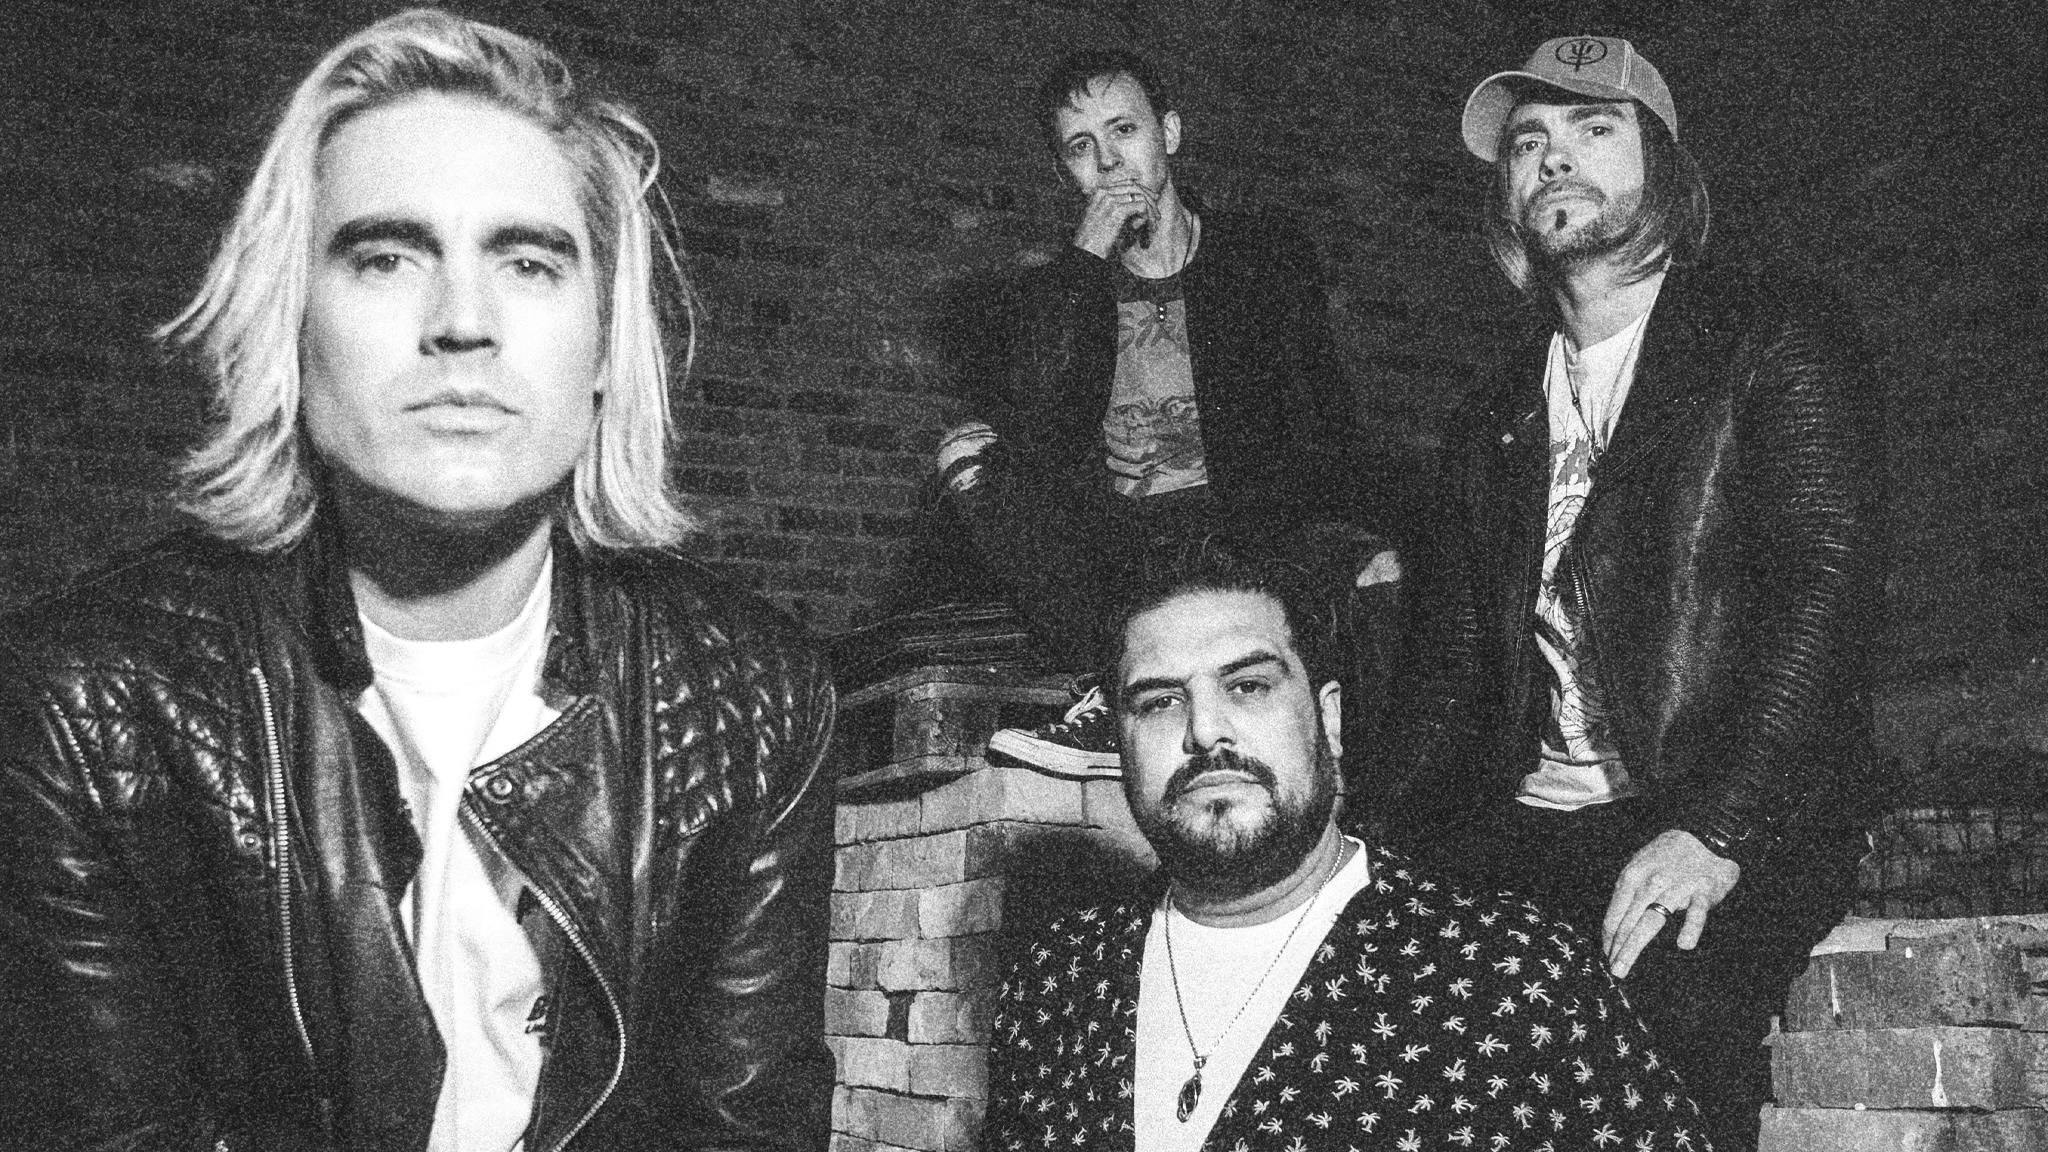 Fightstar: “I don’t go a day without being asked when we’re coming back. It’s no joke!”